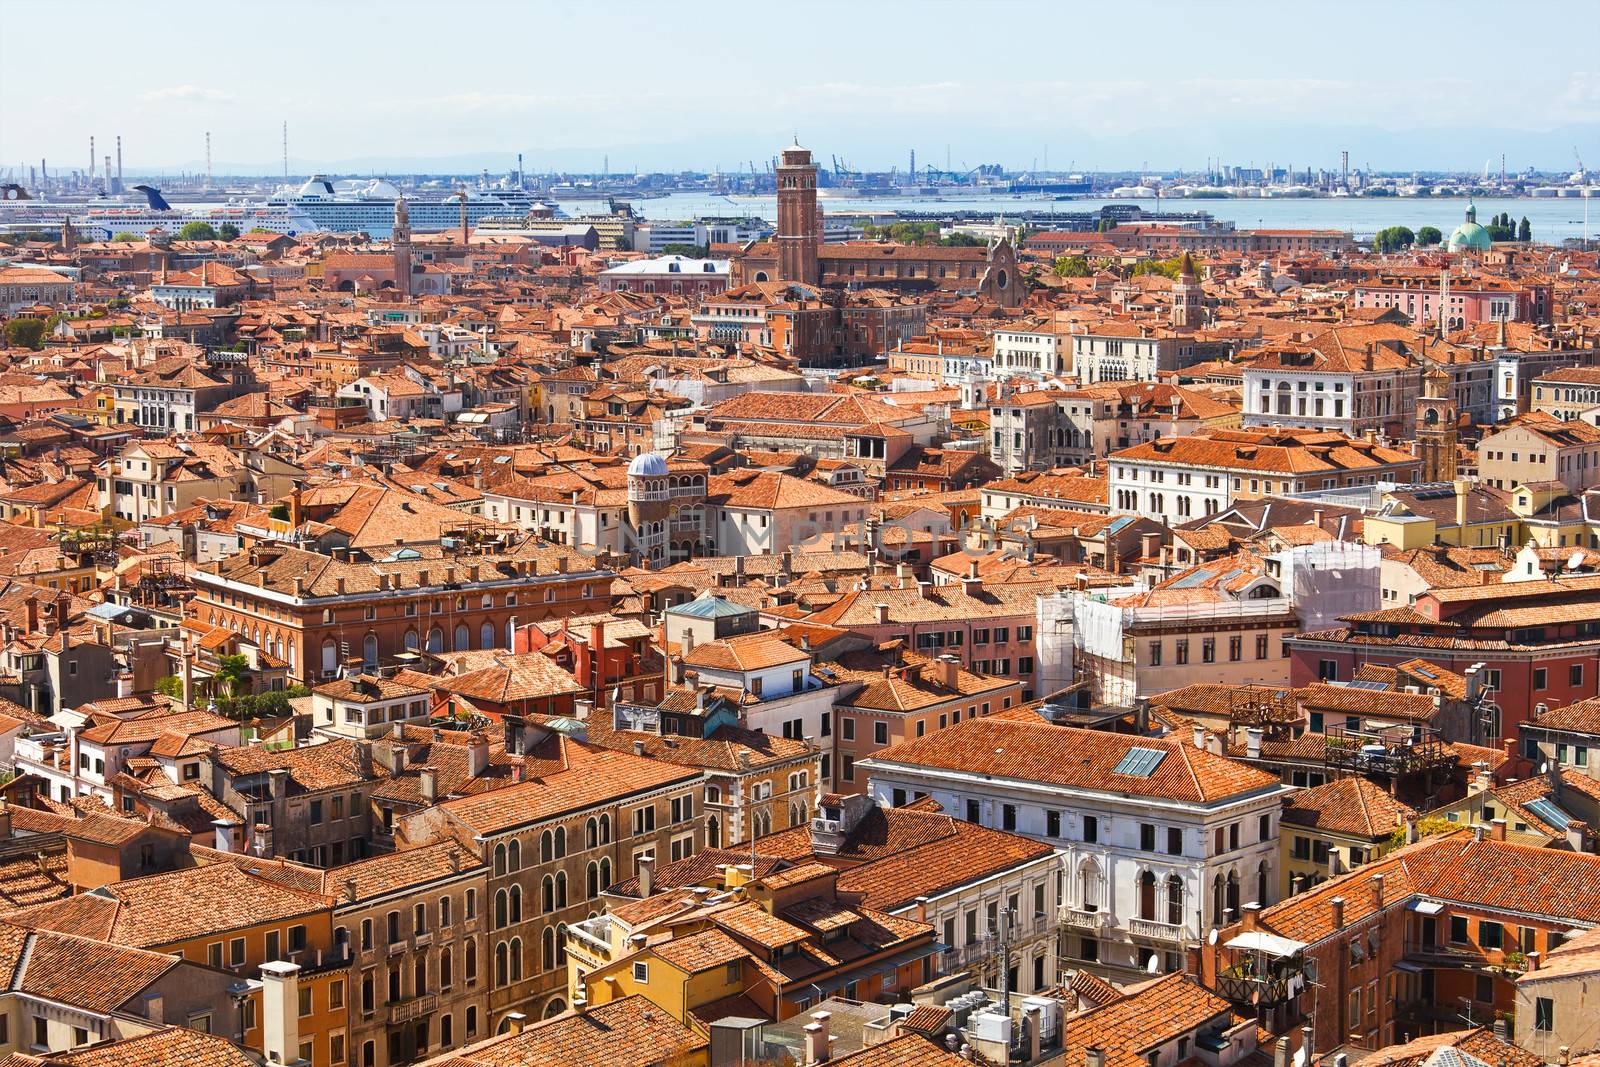 Panoramic view of Venice from San Marco bell tower, Italy